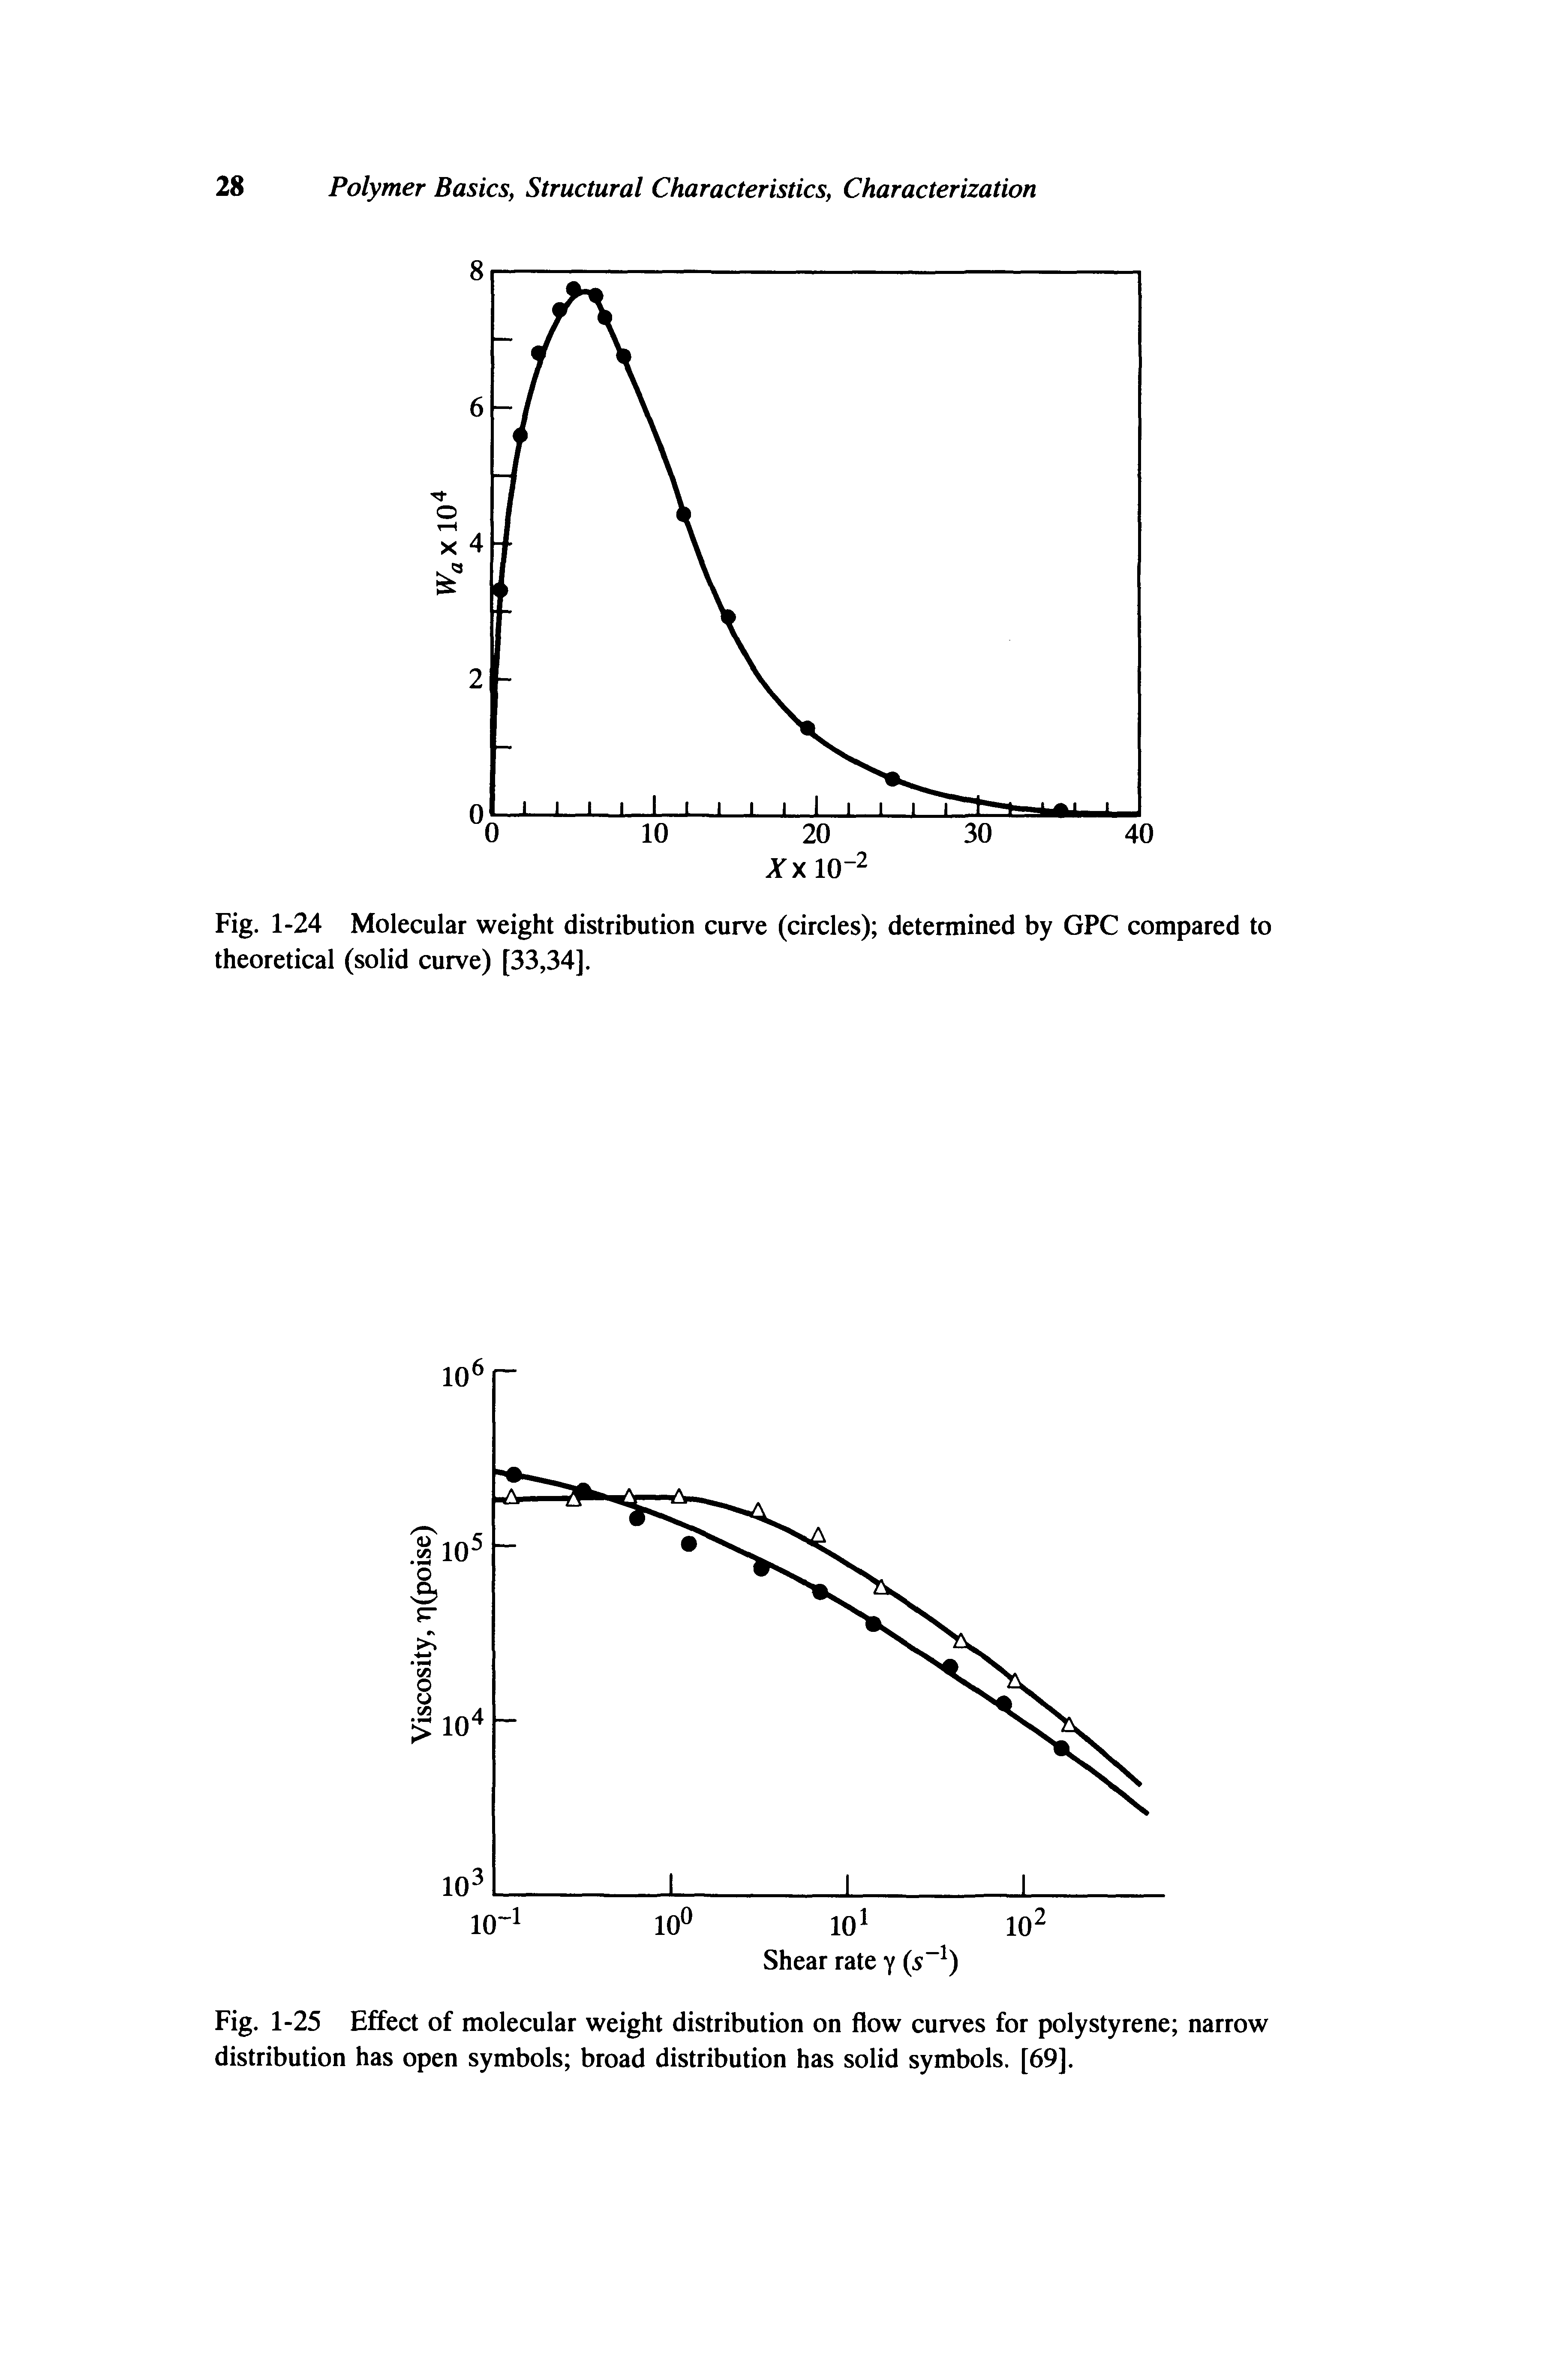 Fig. 1-24 Molecular weight distribution curve (circles) determined by GPC compared to theoretical (solid curve) [33,34].